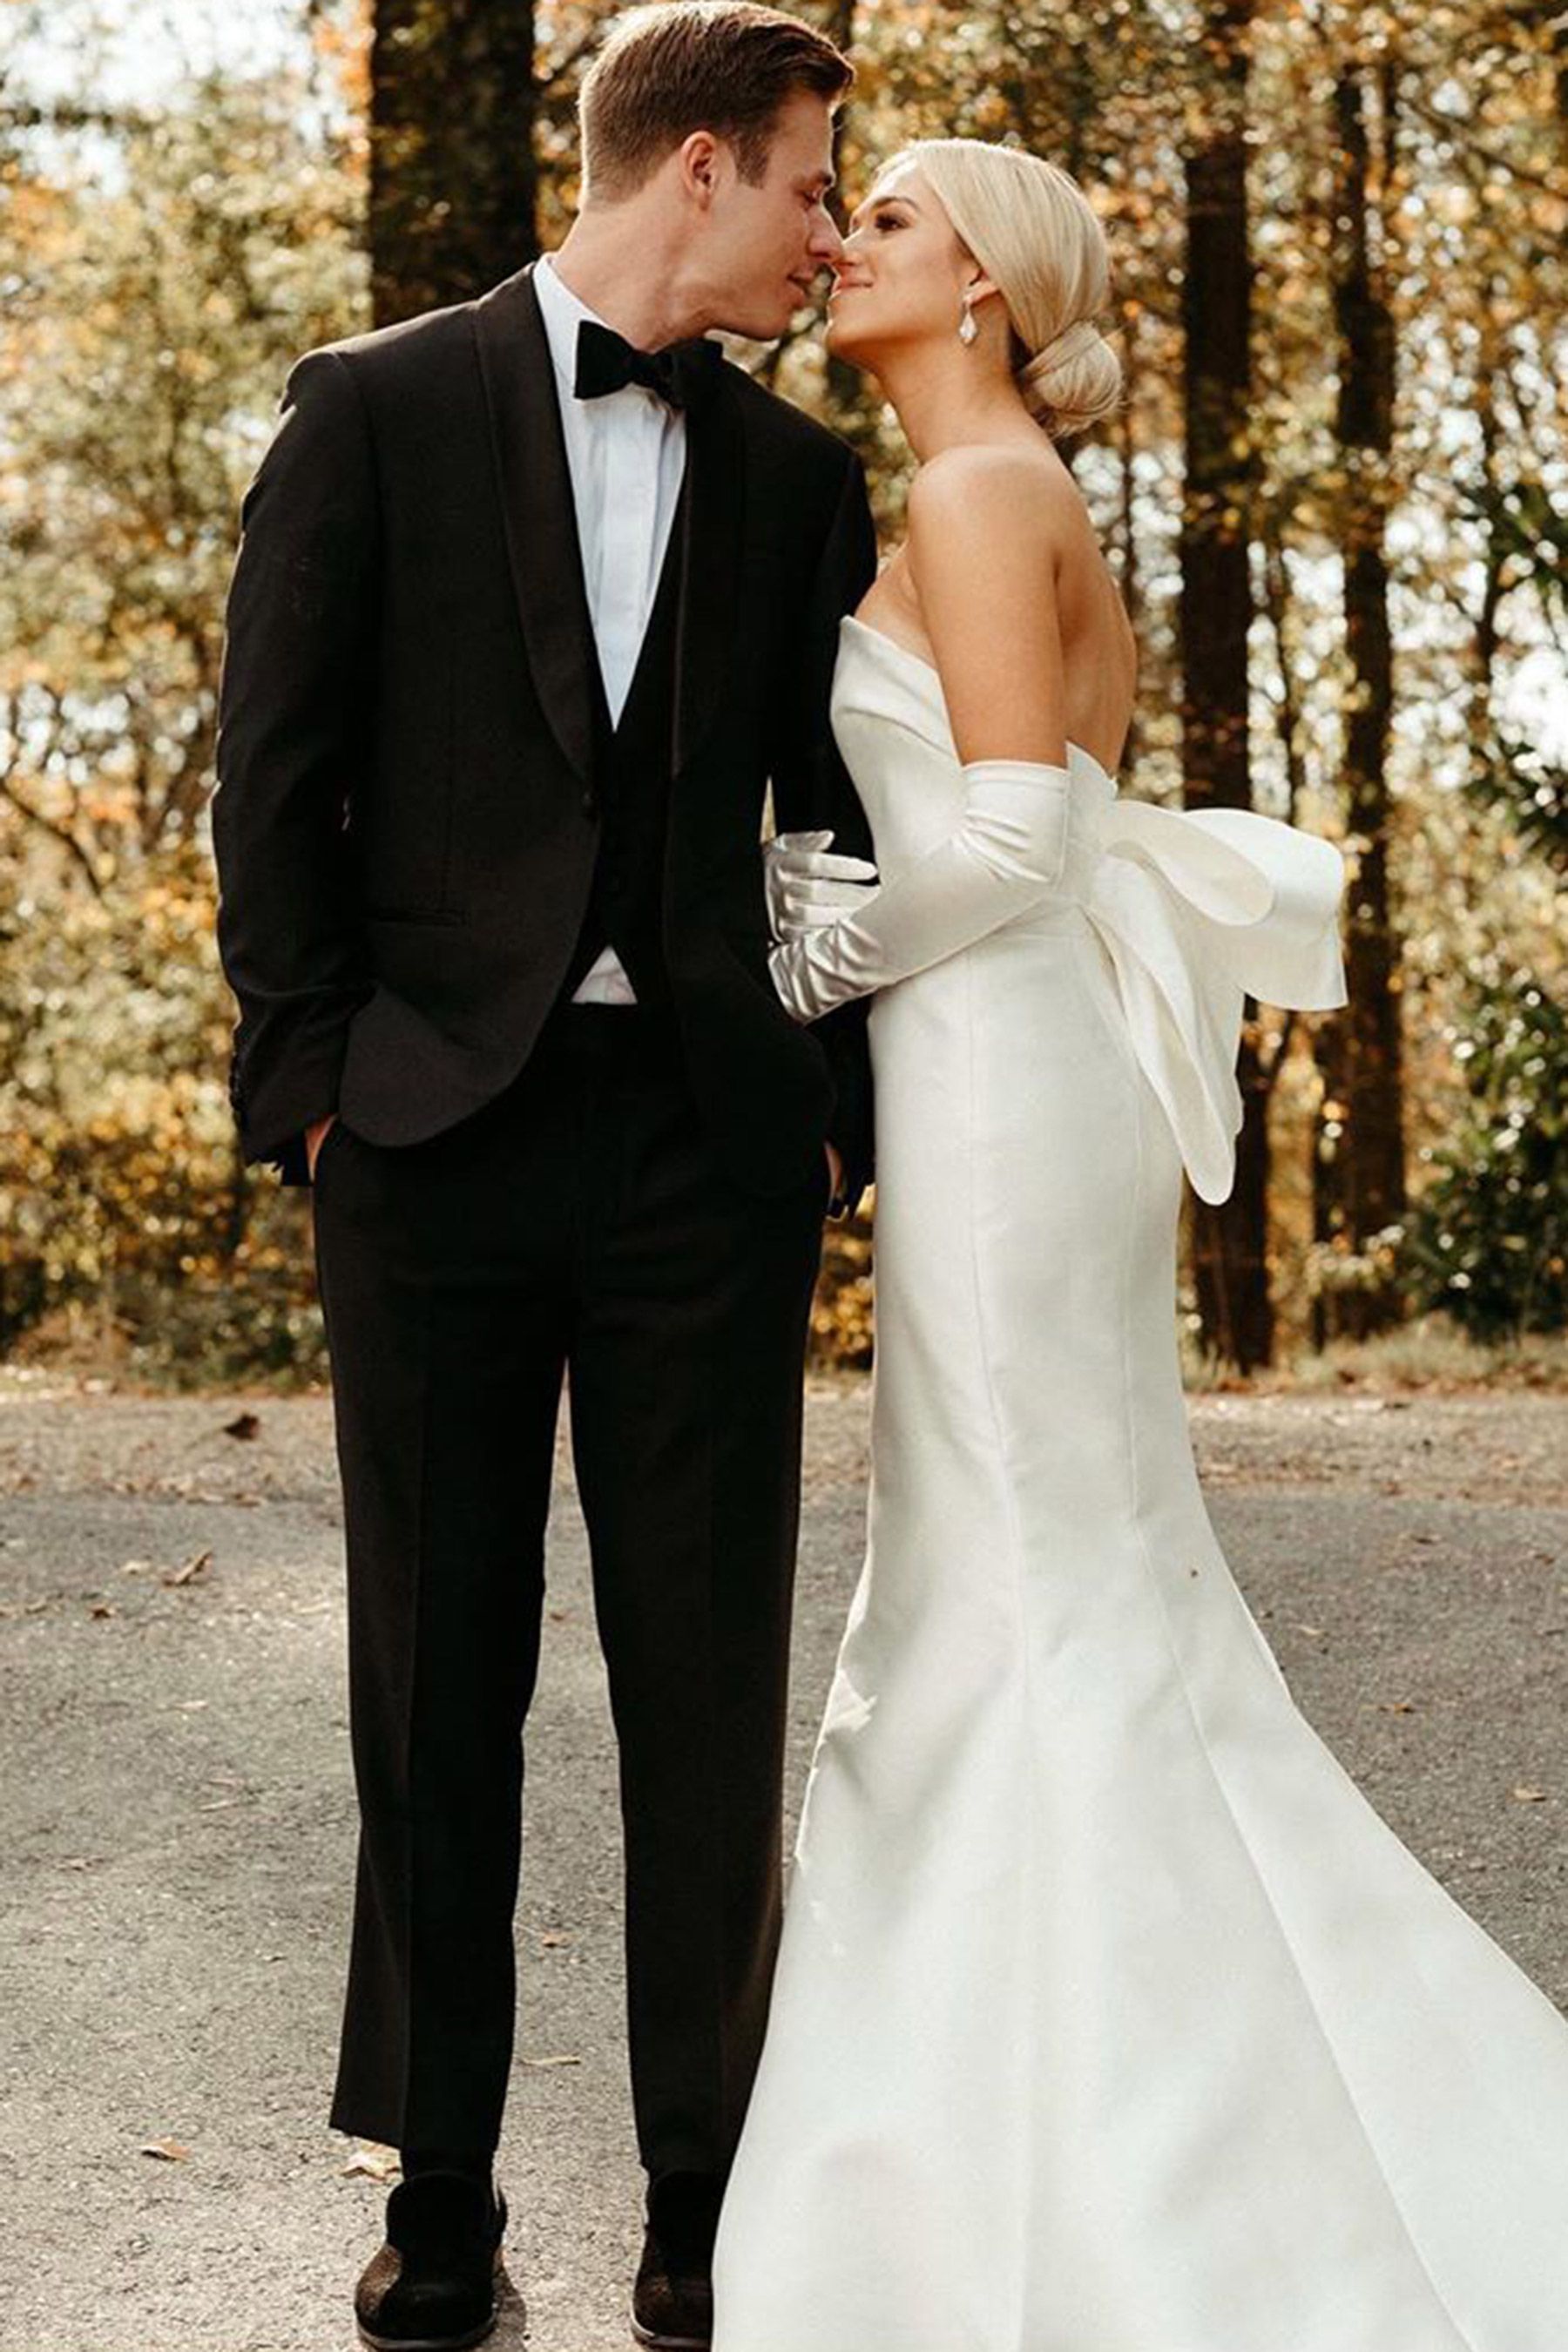 Newlyweds Sadie Robertson and Christian Huff Share First Wedding Photos: 'Forever, Me and You' -   17 classic wedding Photos ideas